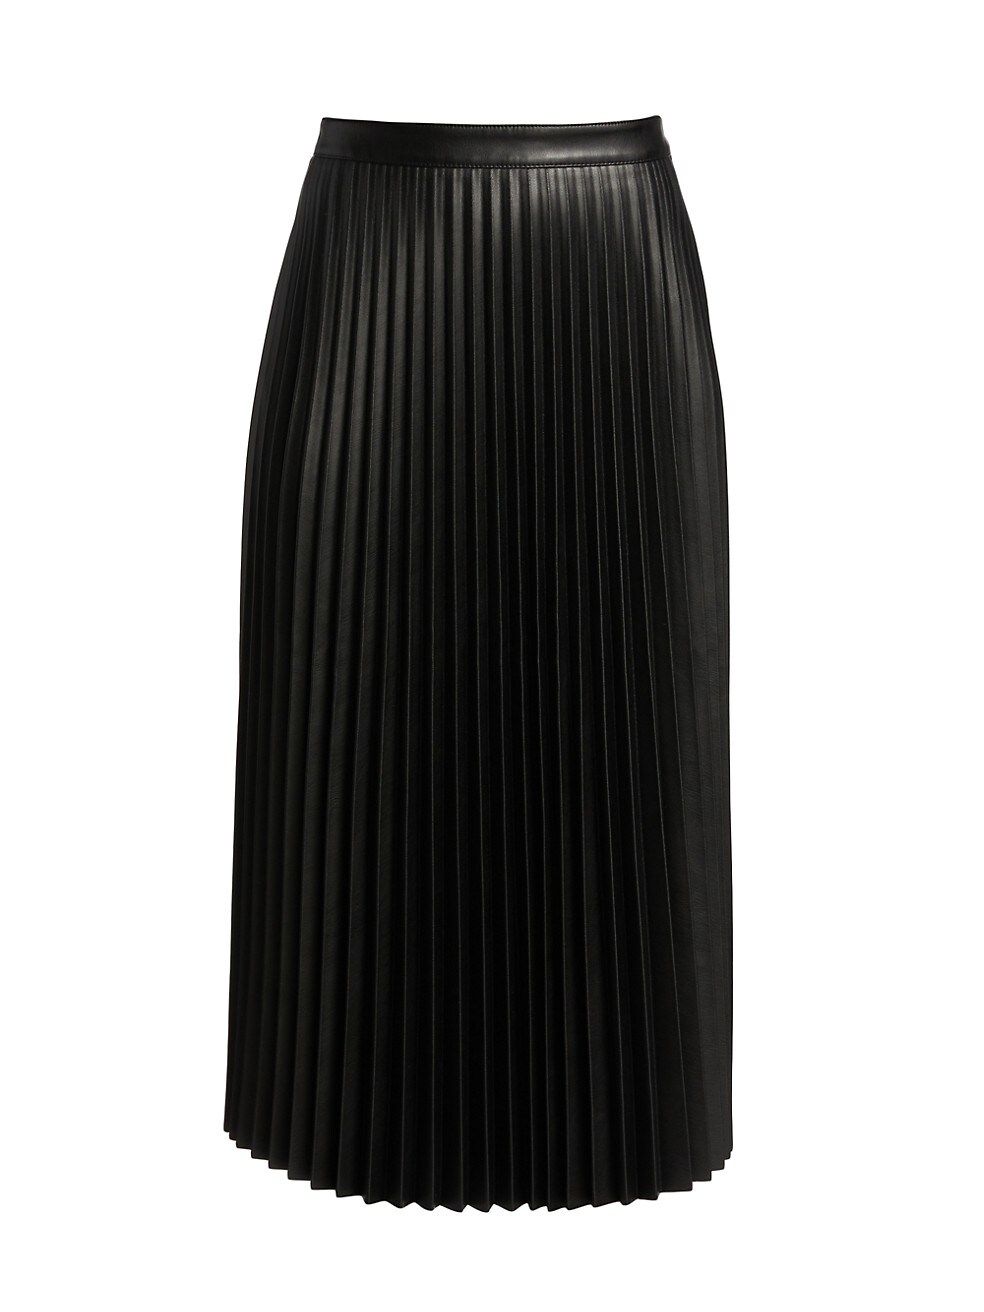 Proenza Schouler White Label Pleated Faux-Leather Midi-Skirt | Saks Fifth Avenue